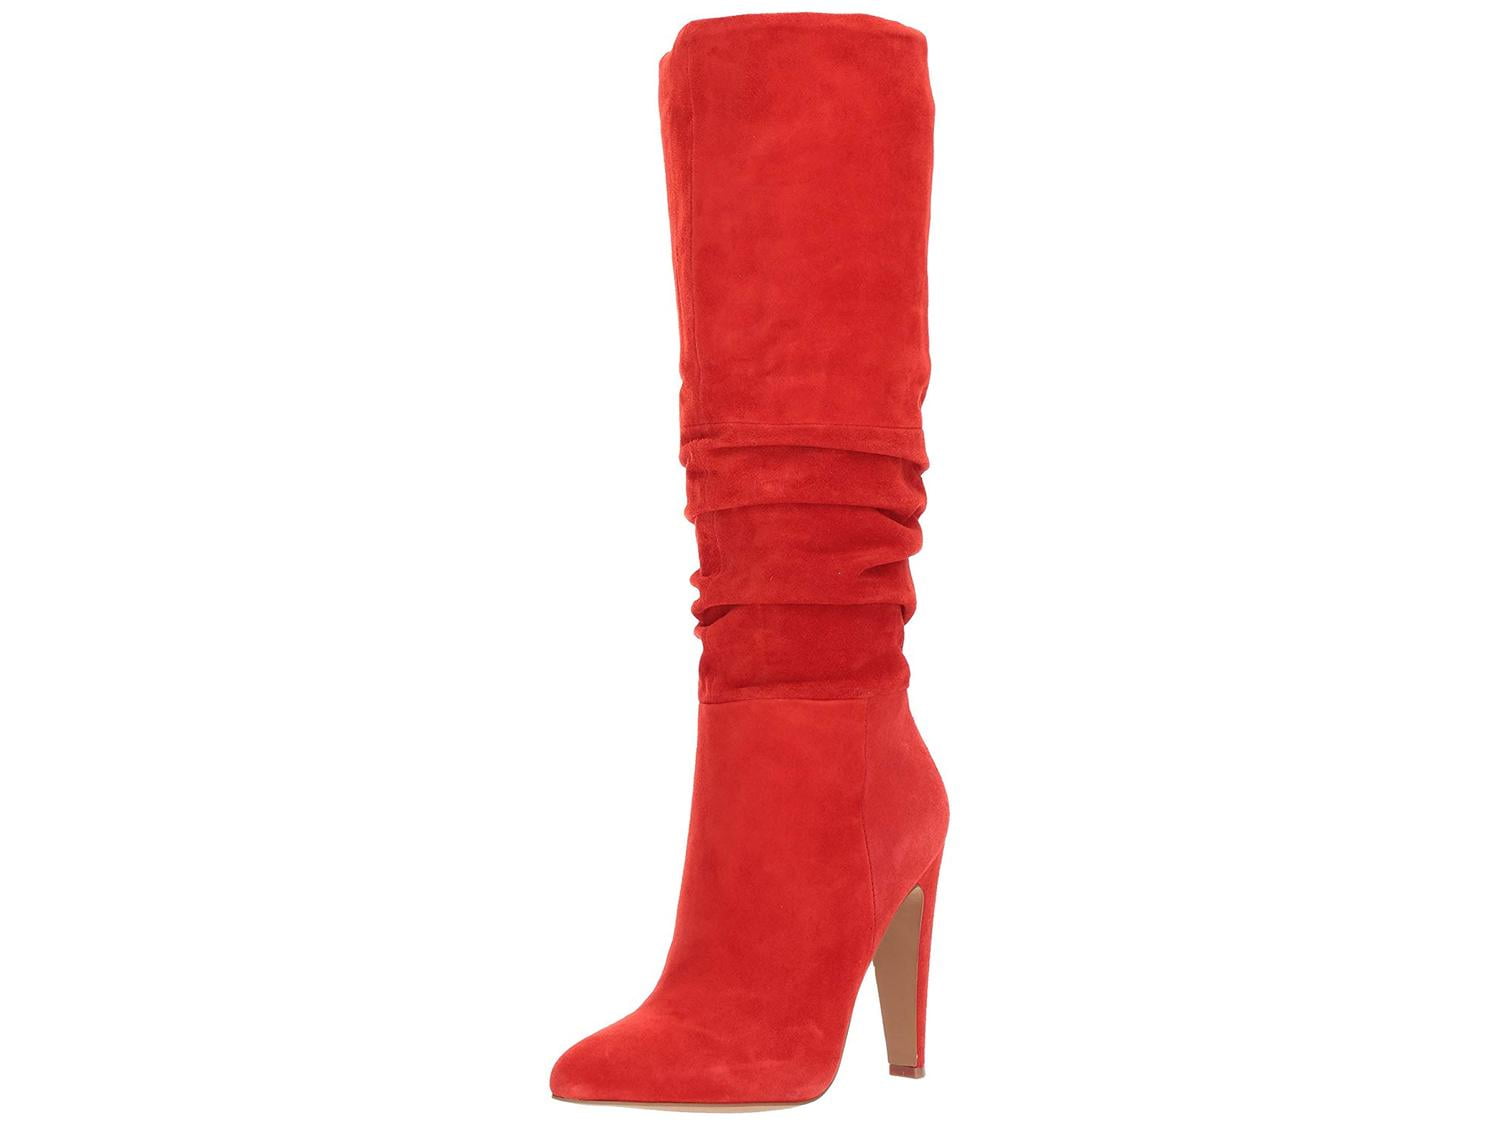 Madden Womens Carrie Leather Pointed Toe Knee High, Red Suede, Size 5.5 Walmart.com